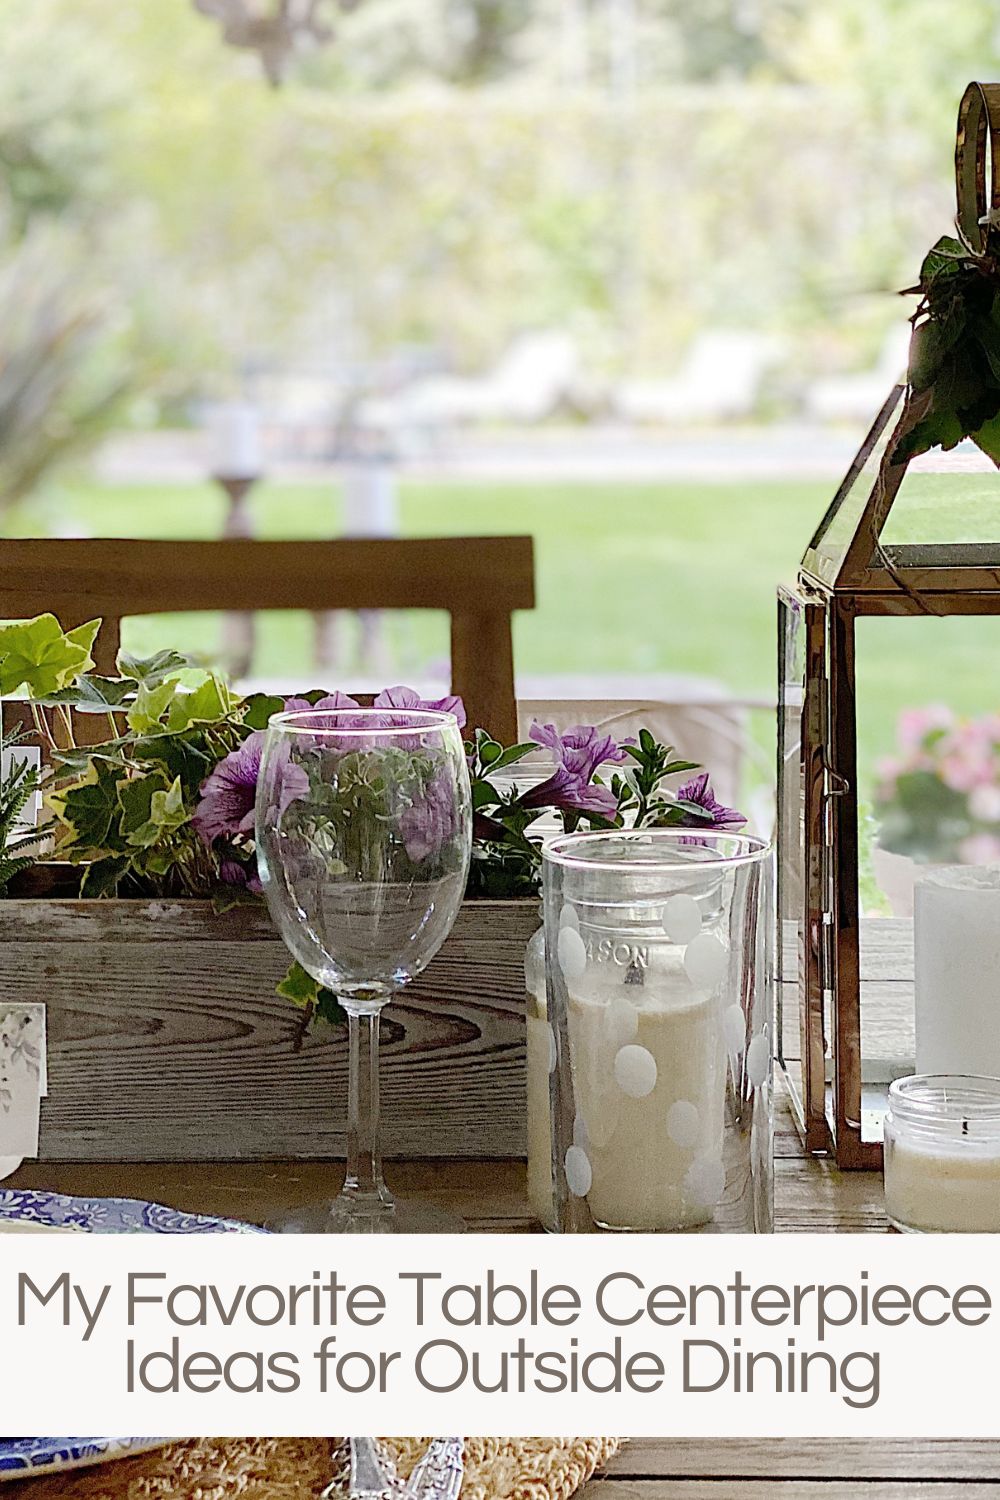 This favorite table centerpiece is inexpensive and can be used over and over (as long as you remember to water it).